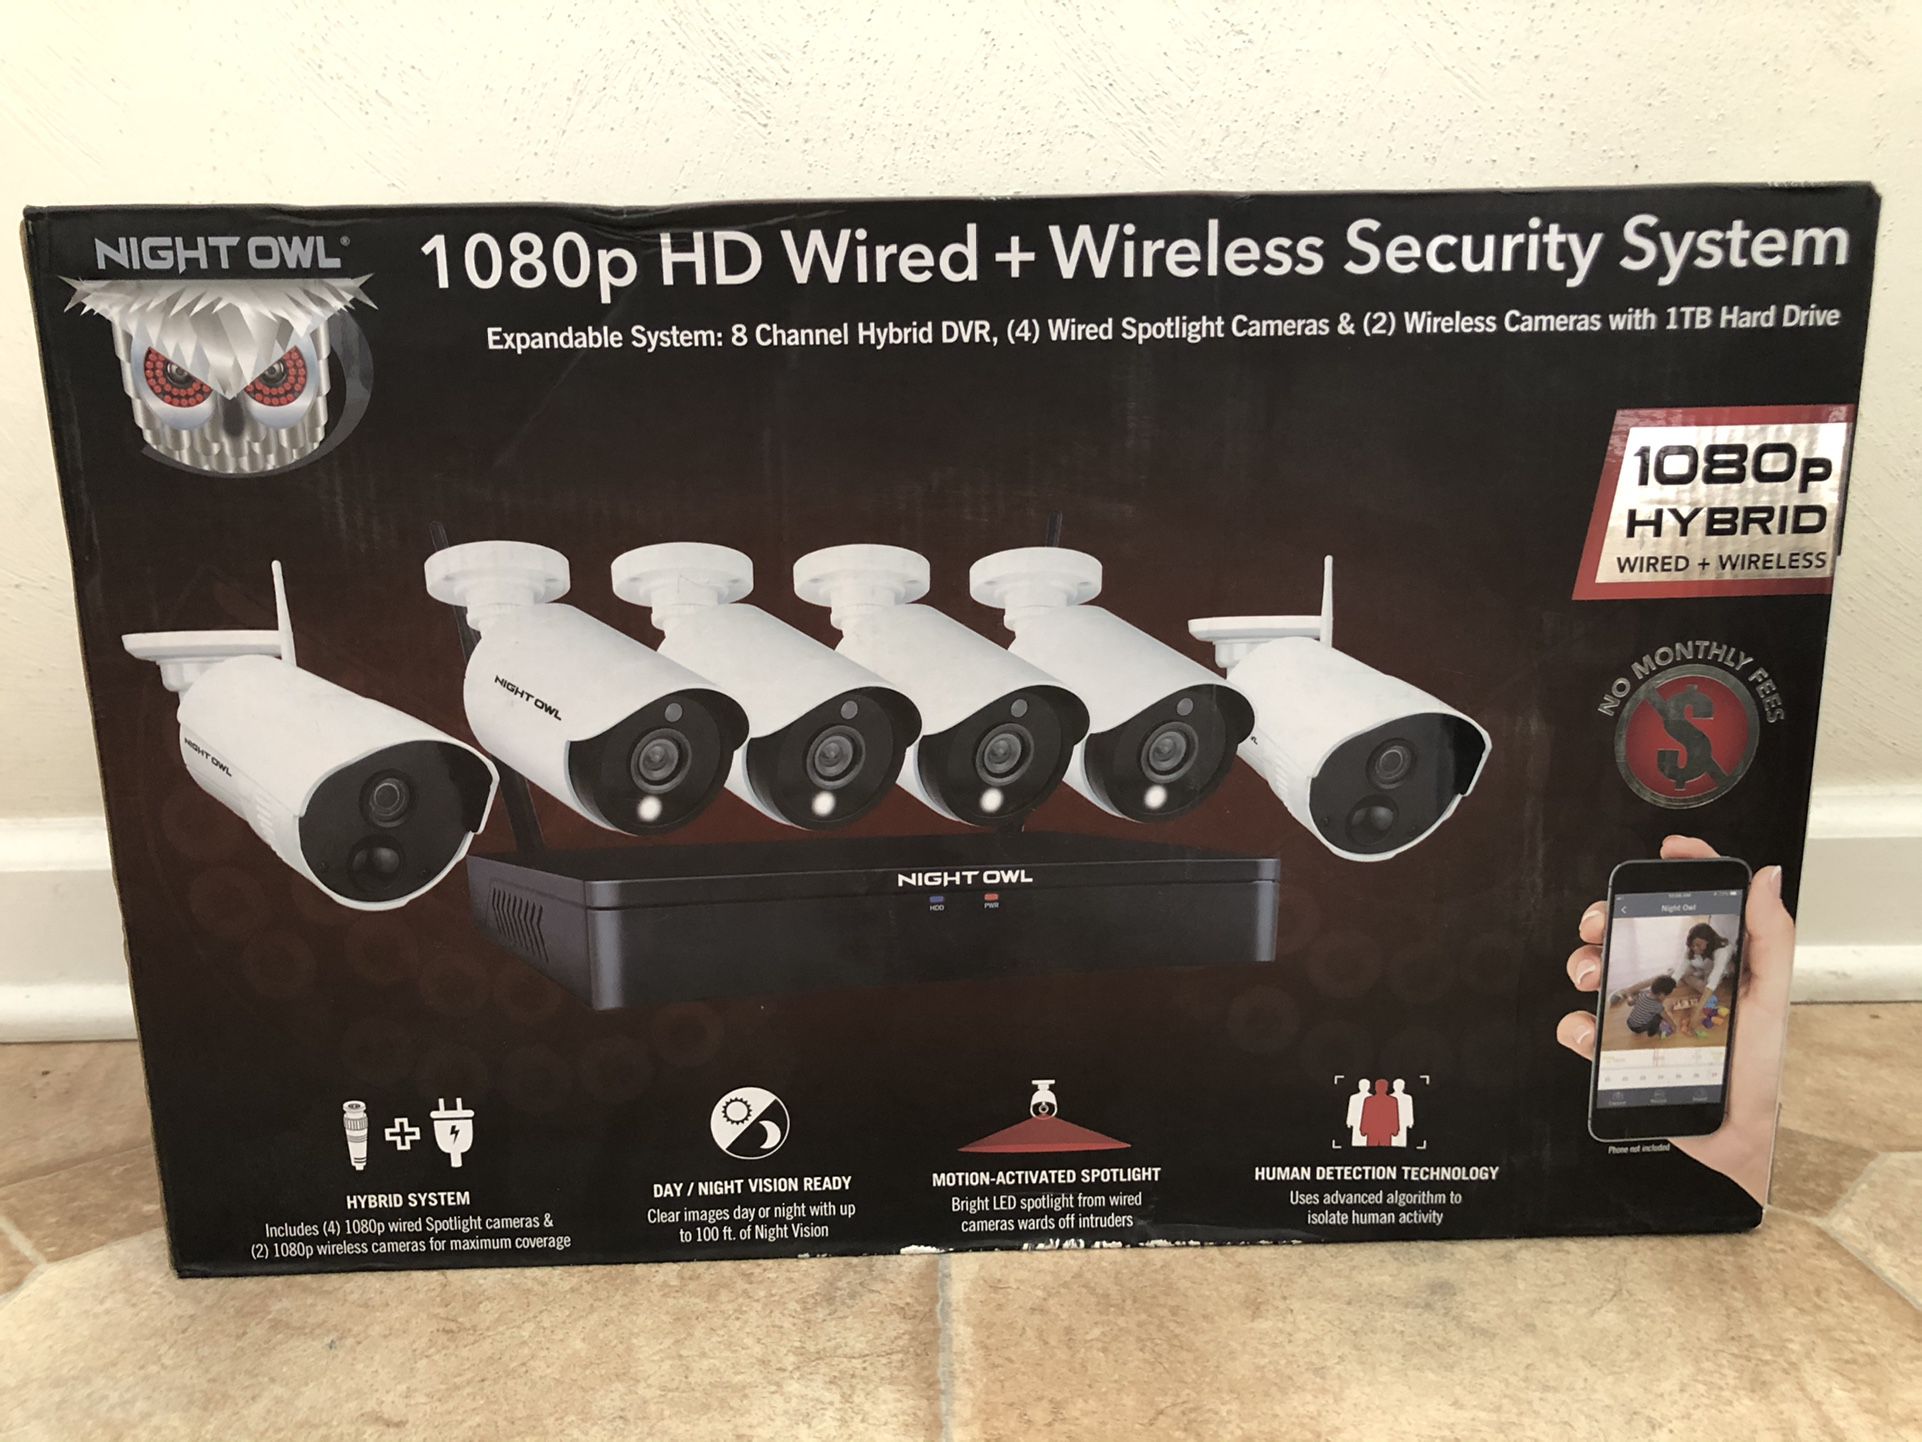 Brand New Night Owl Home Security Camera System with 4 Wired and 2 Wireless 1080p HD Indoor/Outdoor